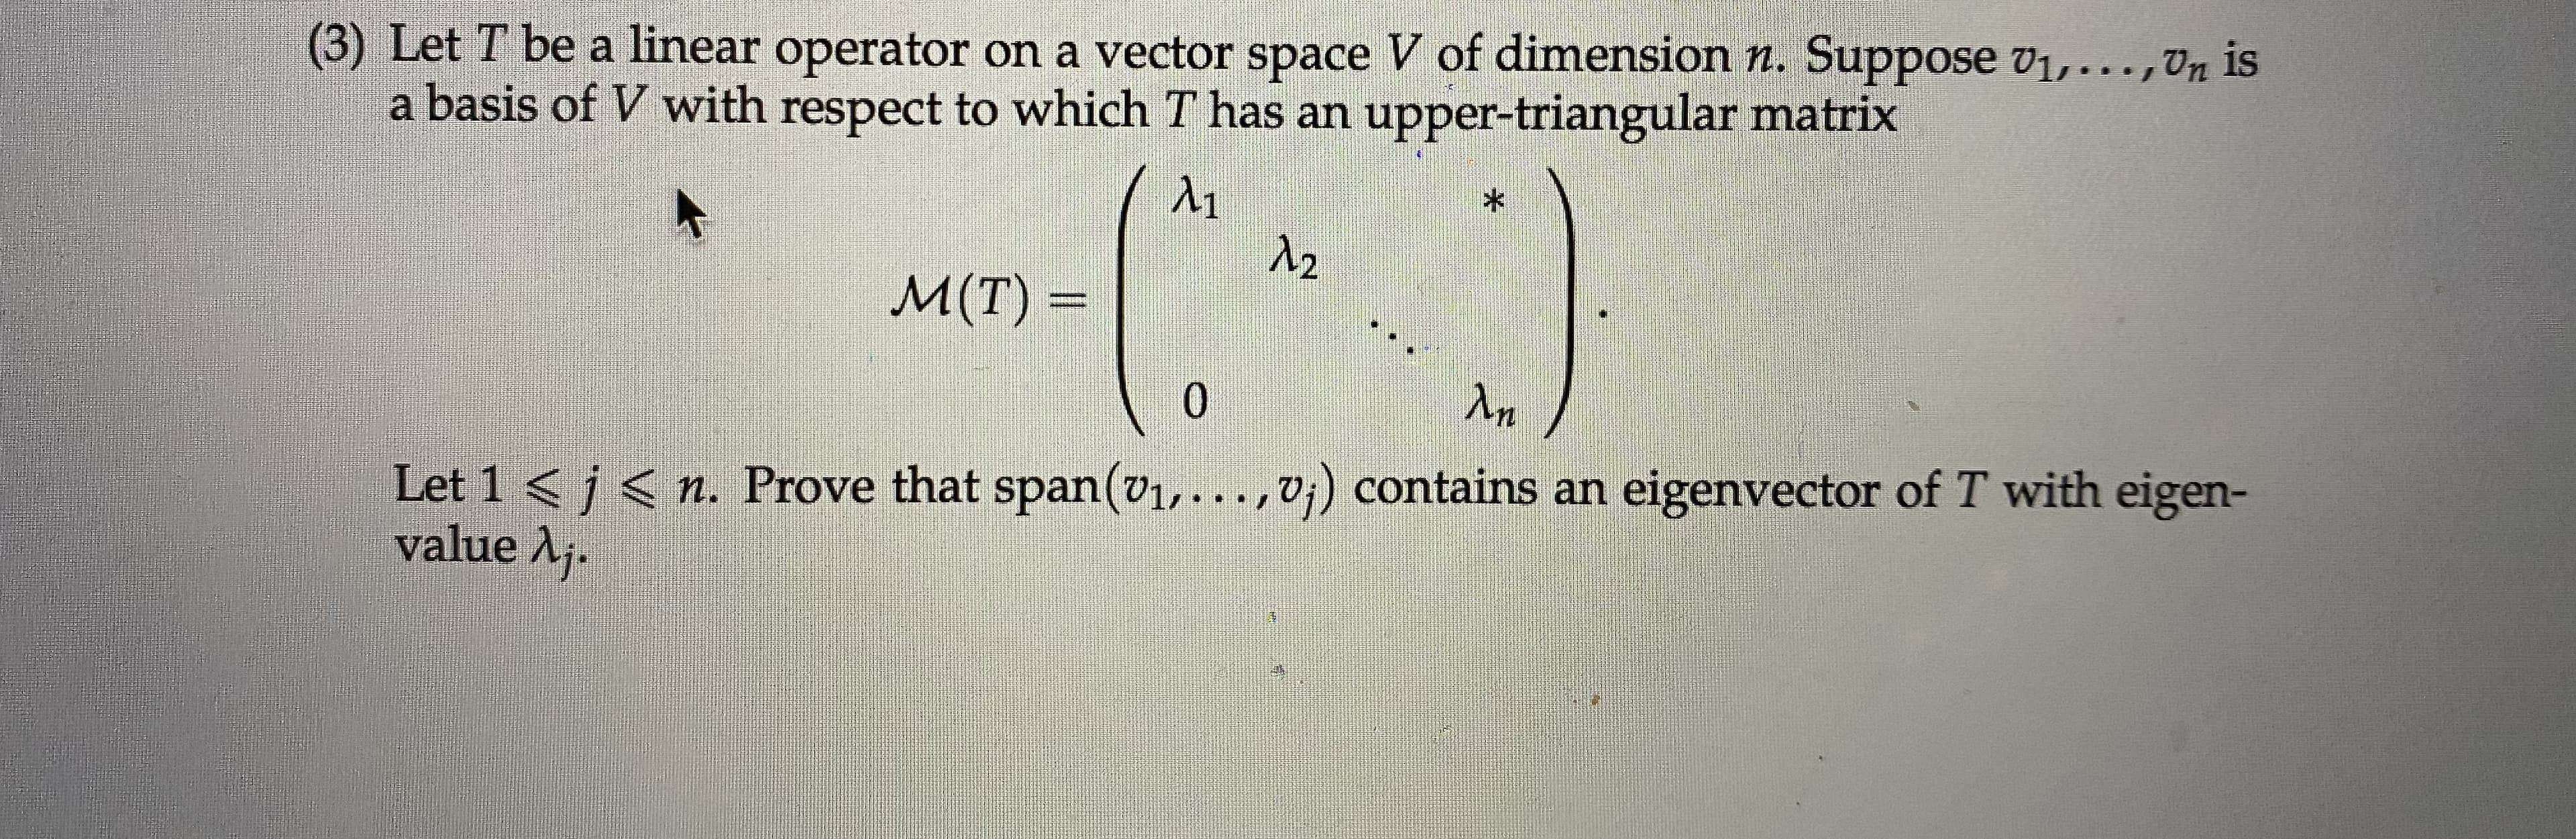 (3) Let T be a linear operator on a vector space V of dimension n. Suppose v1,...,Vn is
a basis of V with respect to which T has an upper-triangular matrix
Л1
Л2
M(T) =
0.
Лn
Let 1 < j < n. Prove that span(v1,...,V¡) contains an eigenvector of T with eigen-
value Aj.
